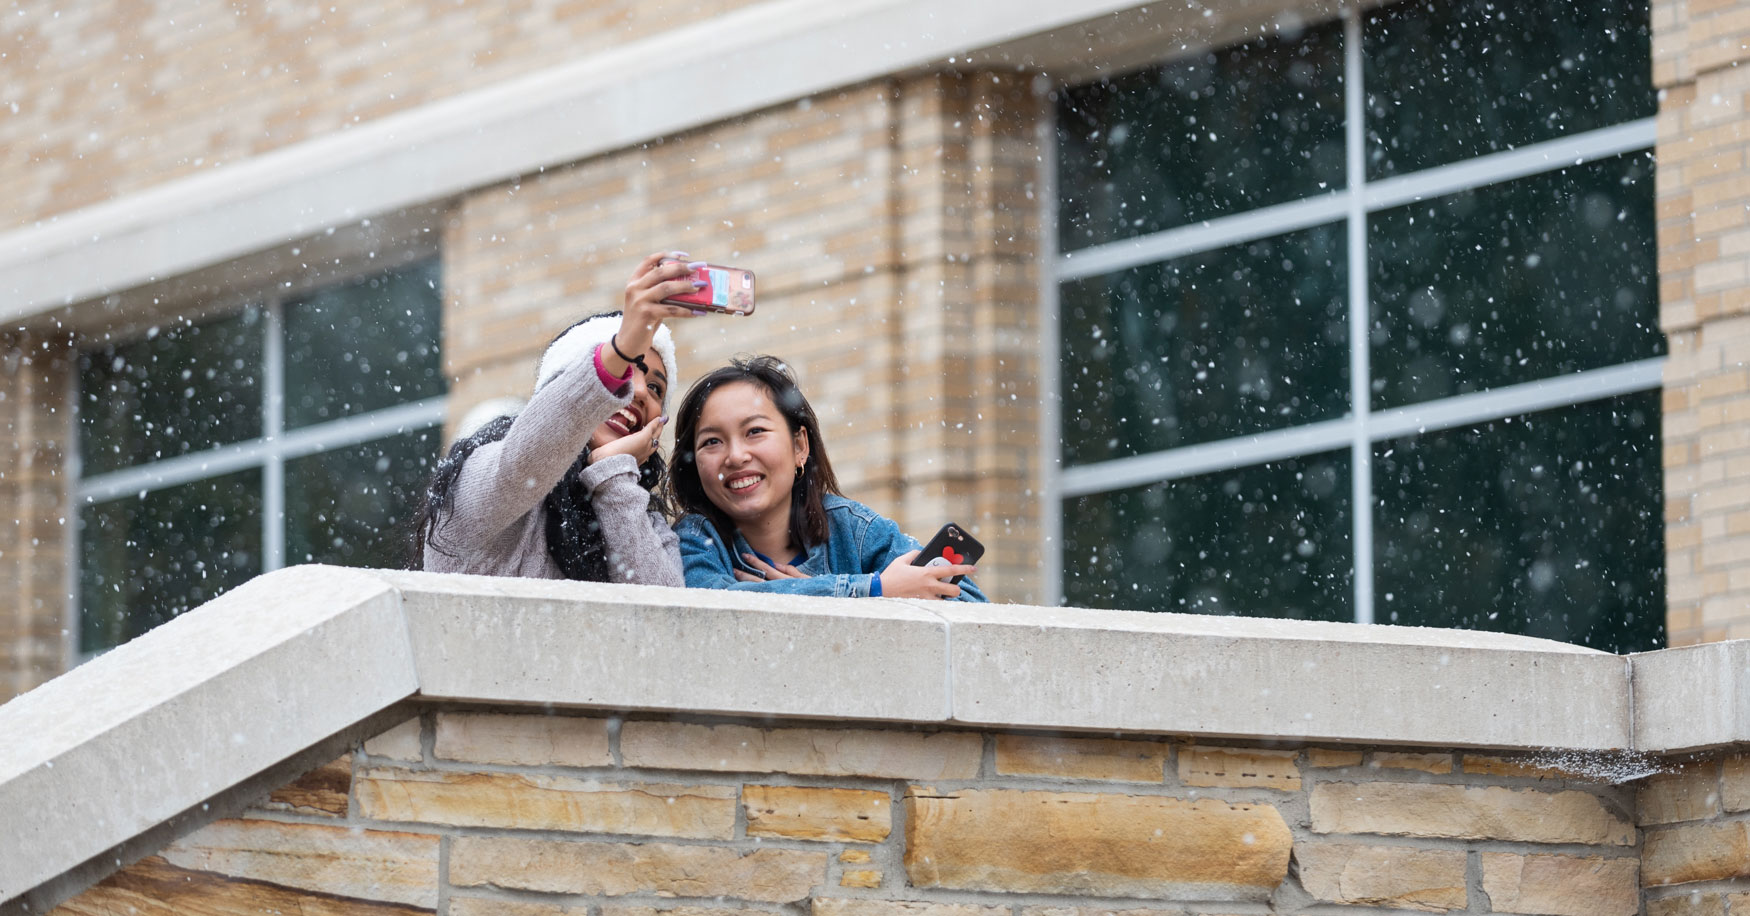 Students taking a selfie in the snow